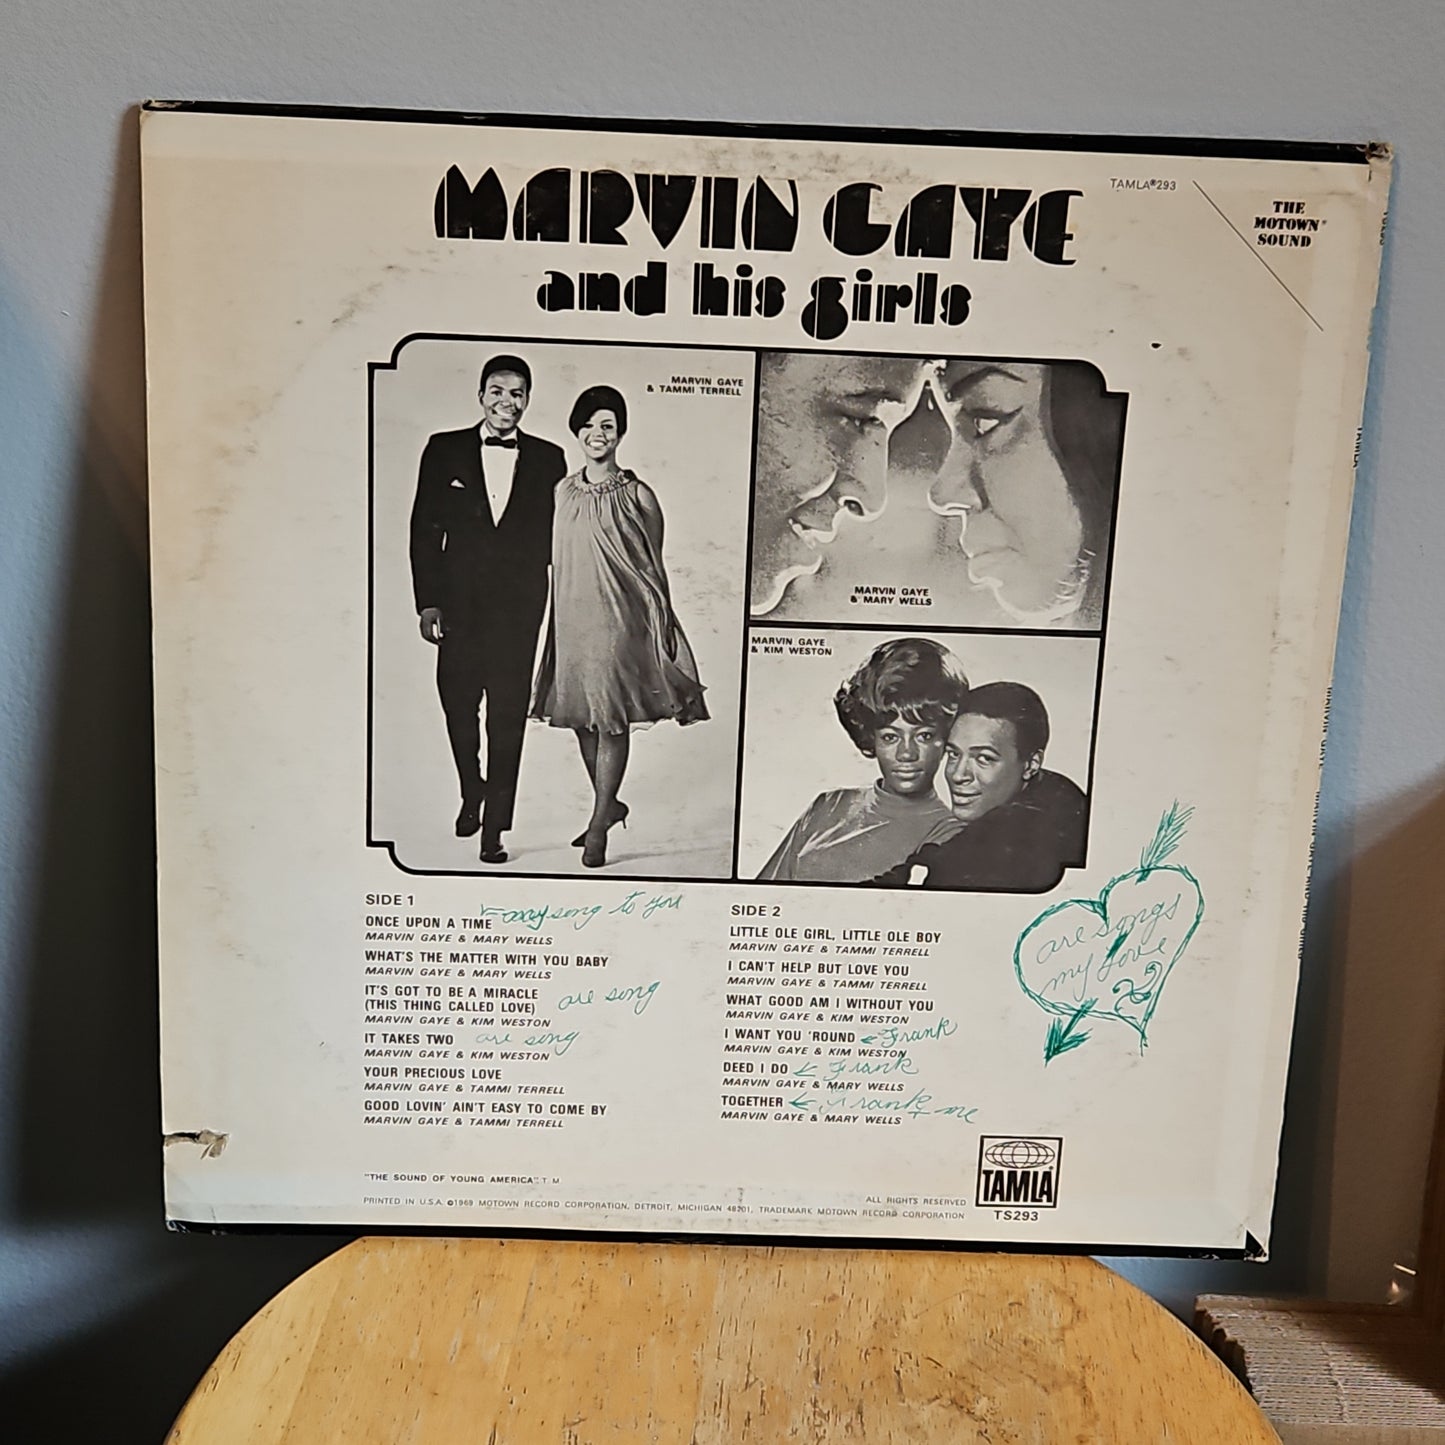 Marvin Gaye and His Girls By Motown Record